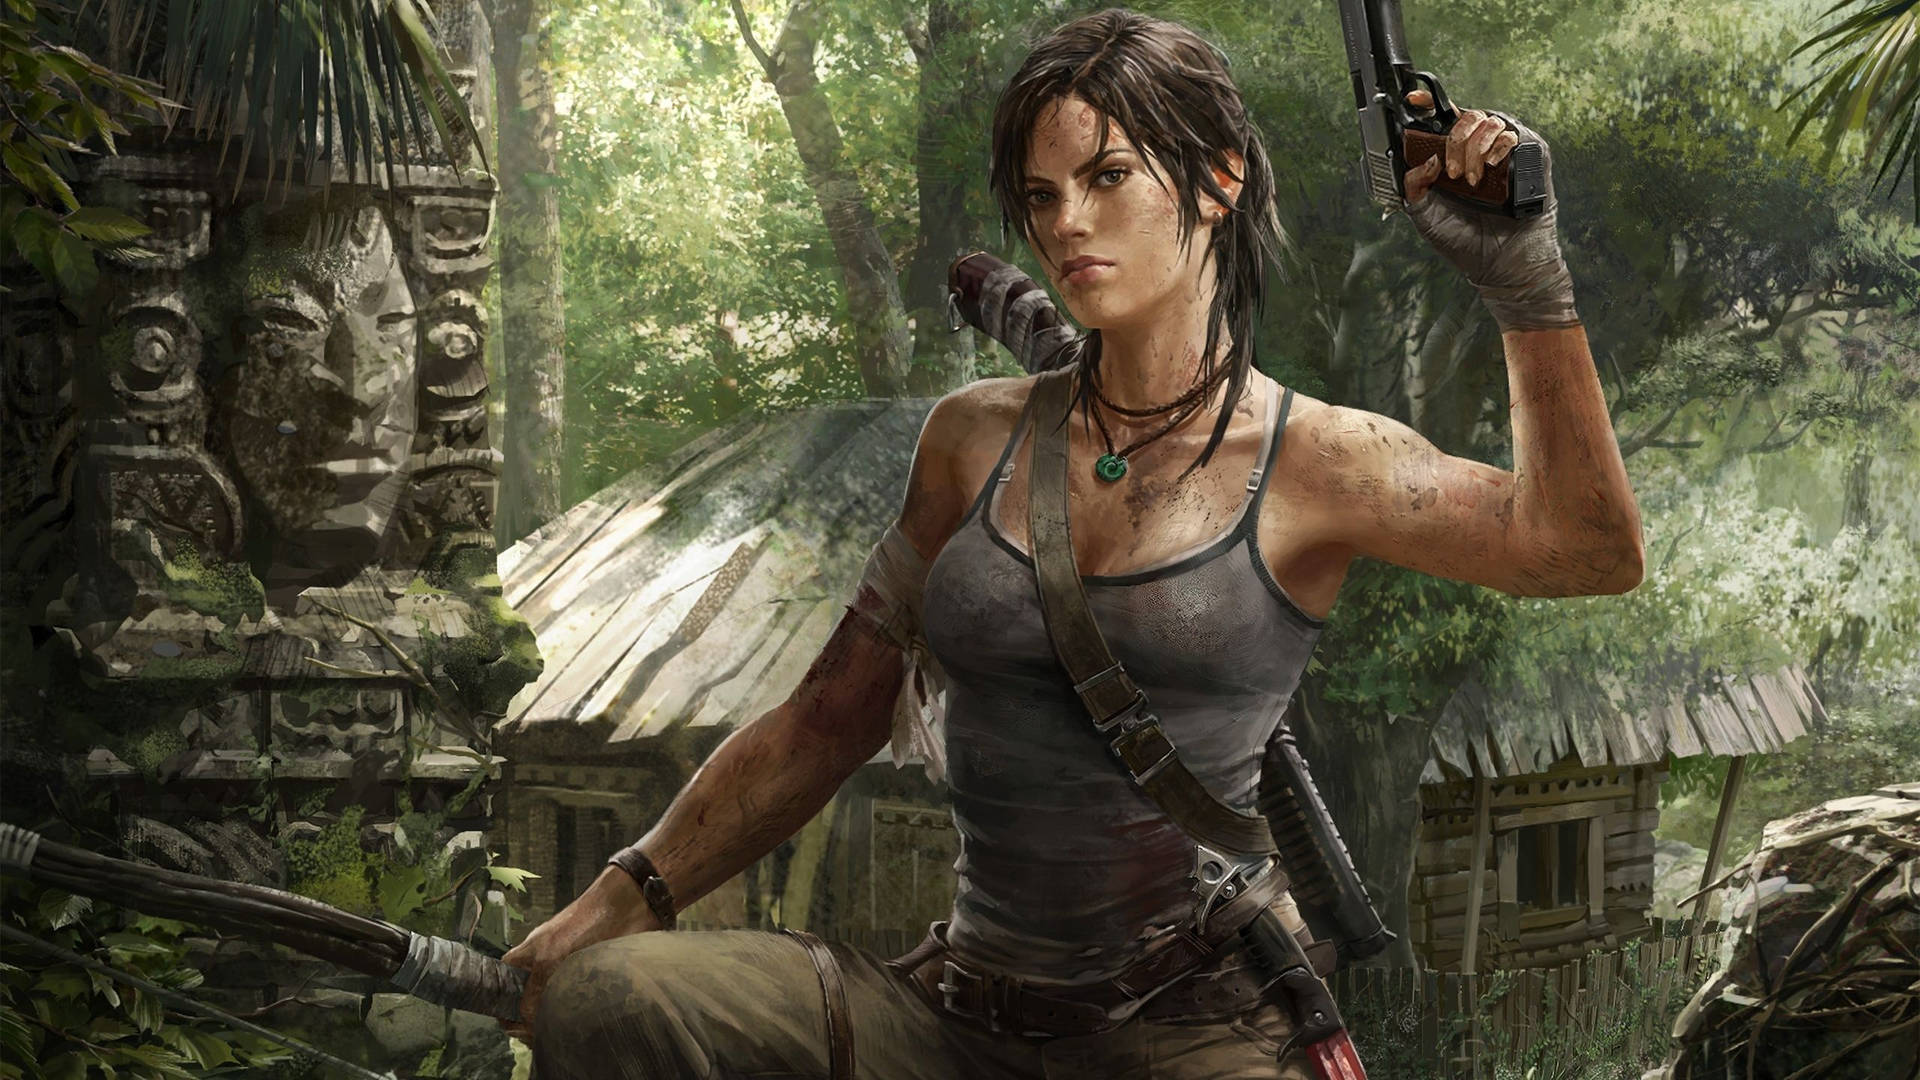 Lara Croft is ready for Action in Tomb Raider 9! Wallpaper